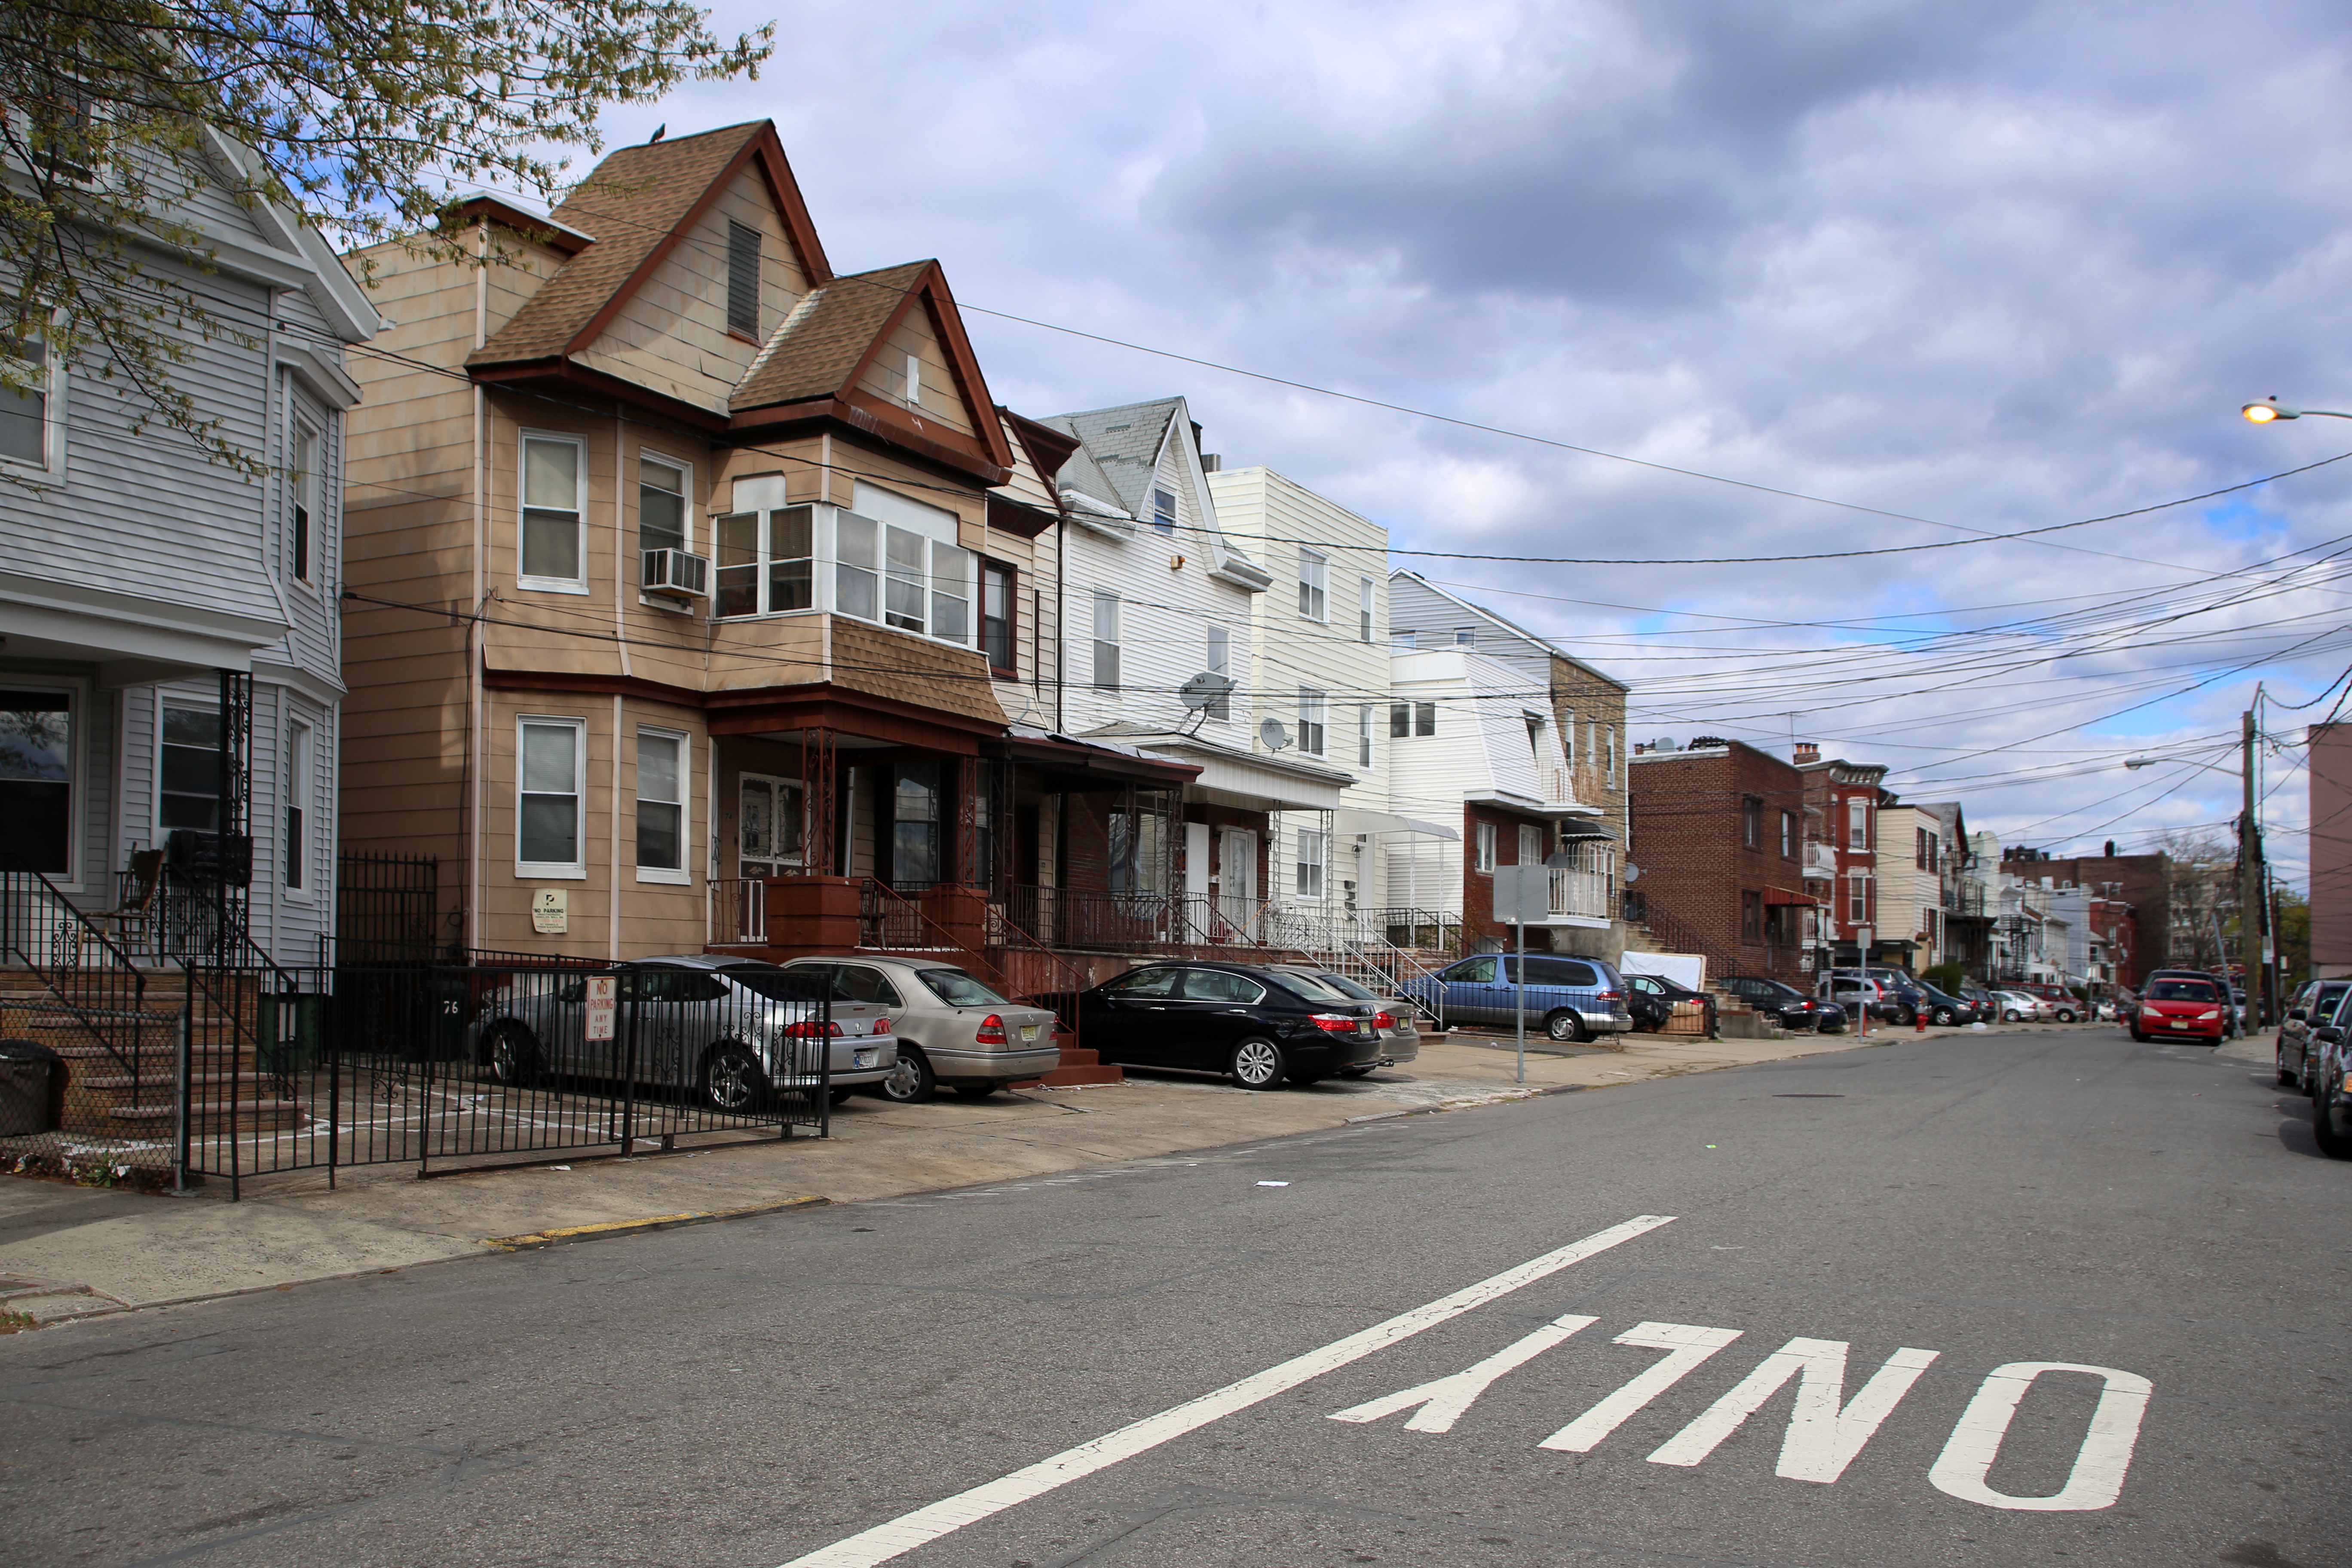 Does Life in a Low-income Neighborhood Lead to Poor Health and